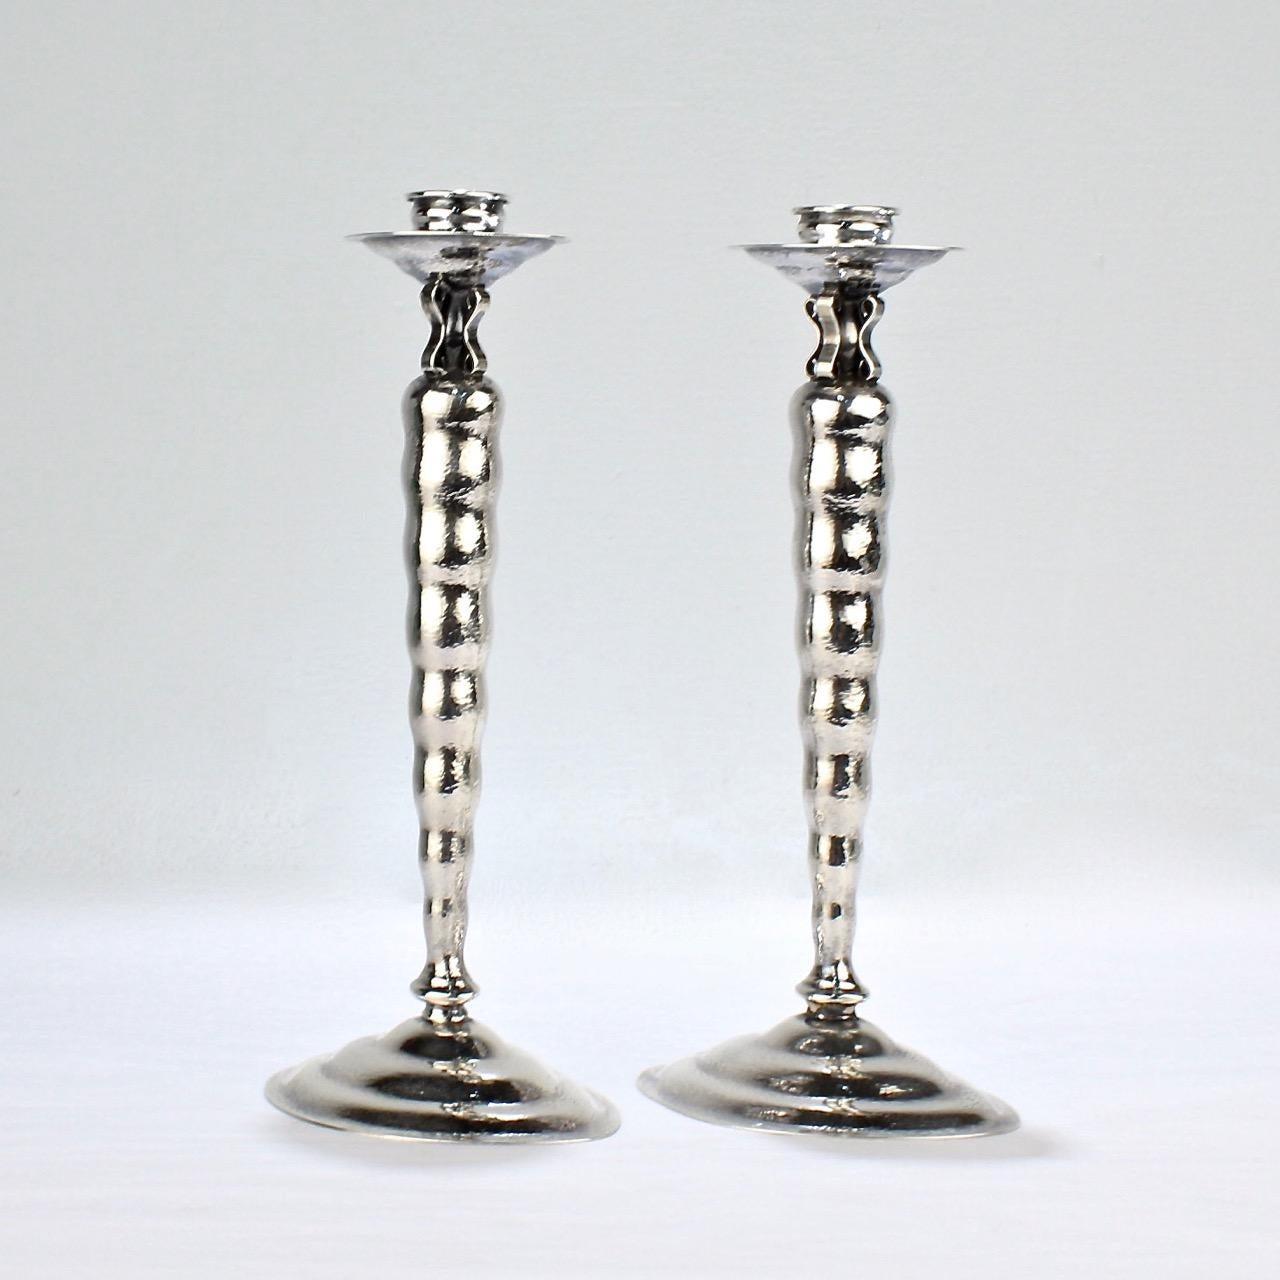 A wonderful pair of Reed & Barton candlesticks.

In the Modernist pattern with a hand hammered finish.

This pair of American Deco candlesticks feature candle cups and bobeches that rest above a tapered, undulating shafts and bases. The undulating